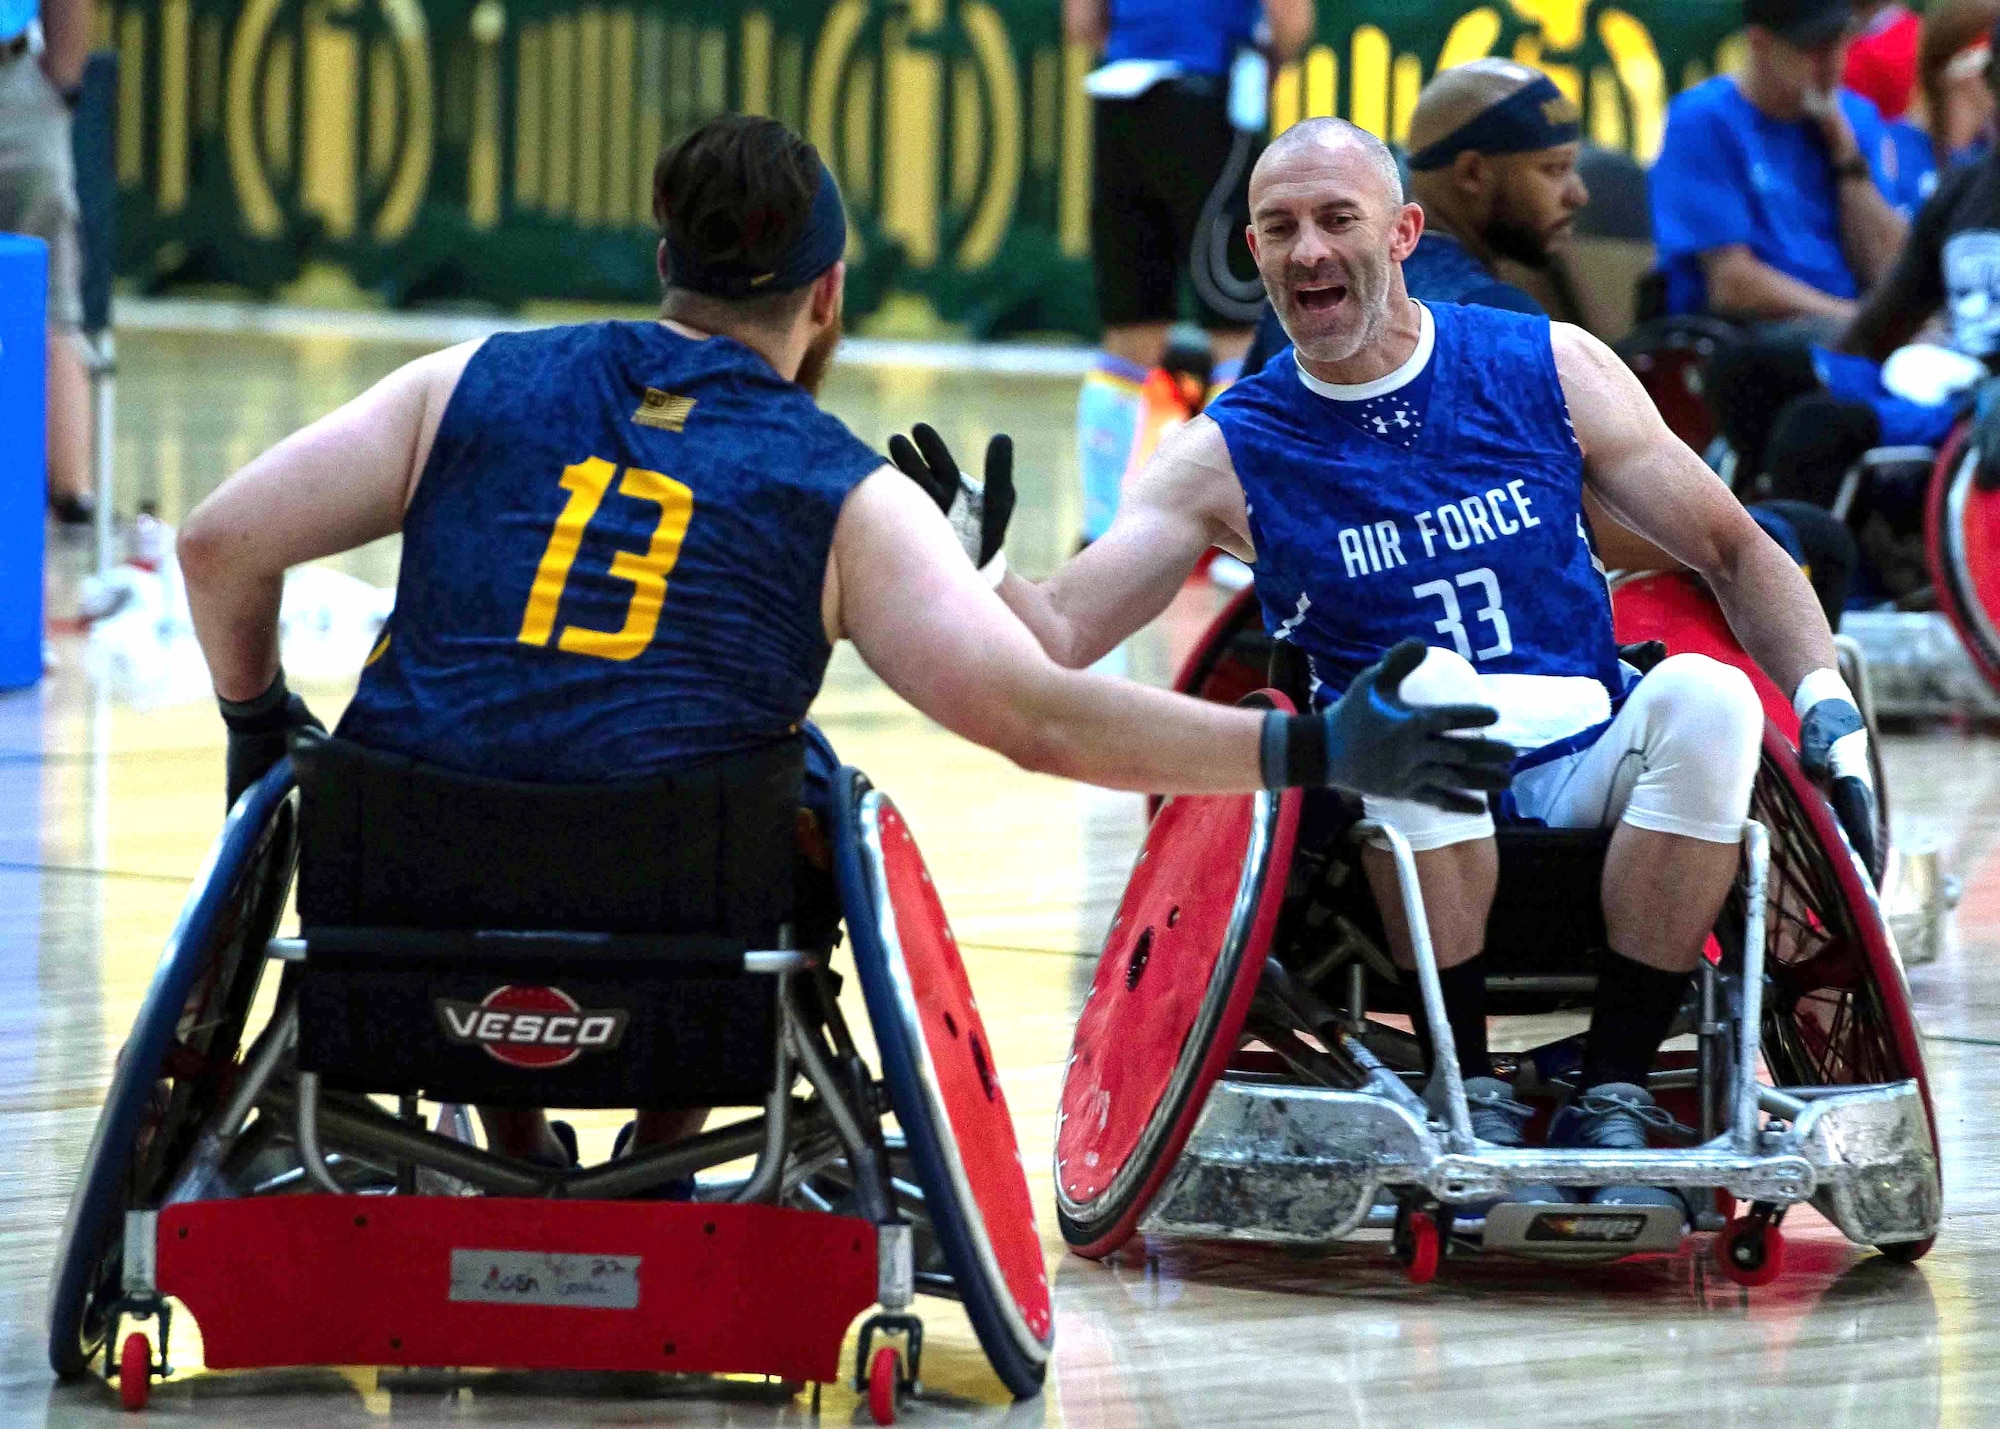 Wheelchair rugby